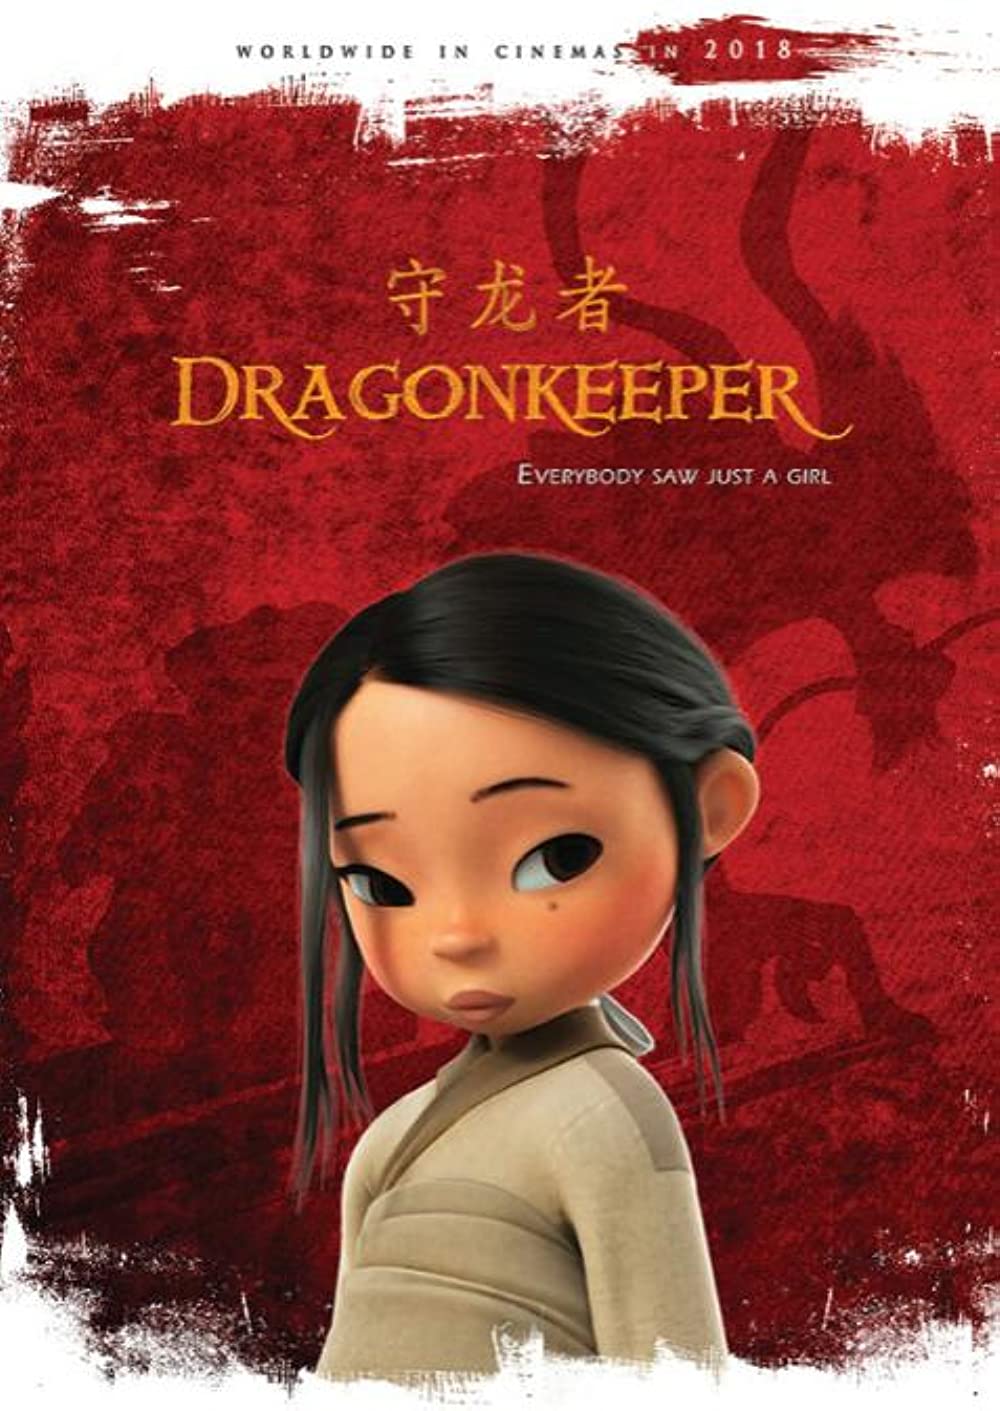 Dragonkeeper Movie (2023) Cast, Release Date, Story, Budget, Collection, Poster, Trailer, Review